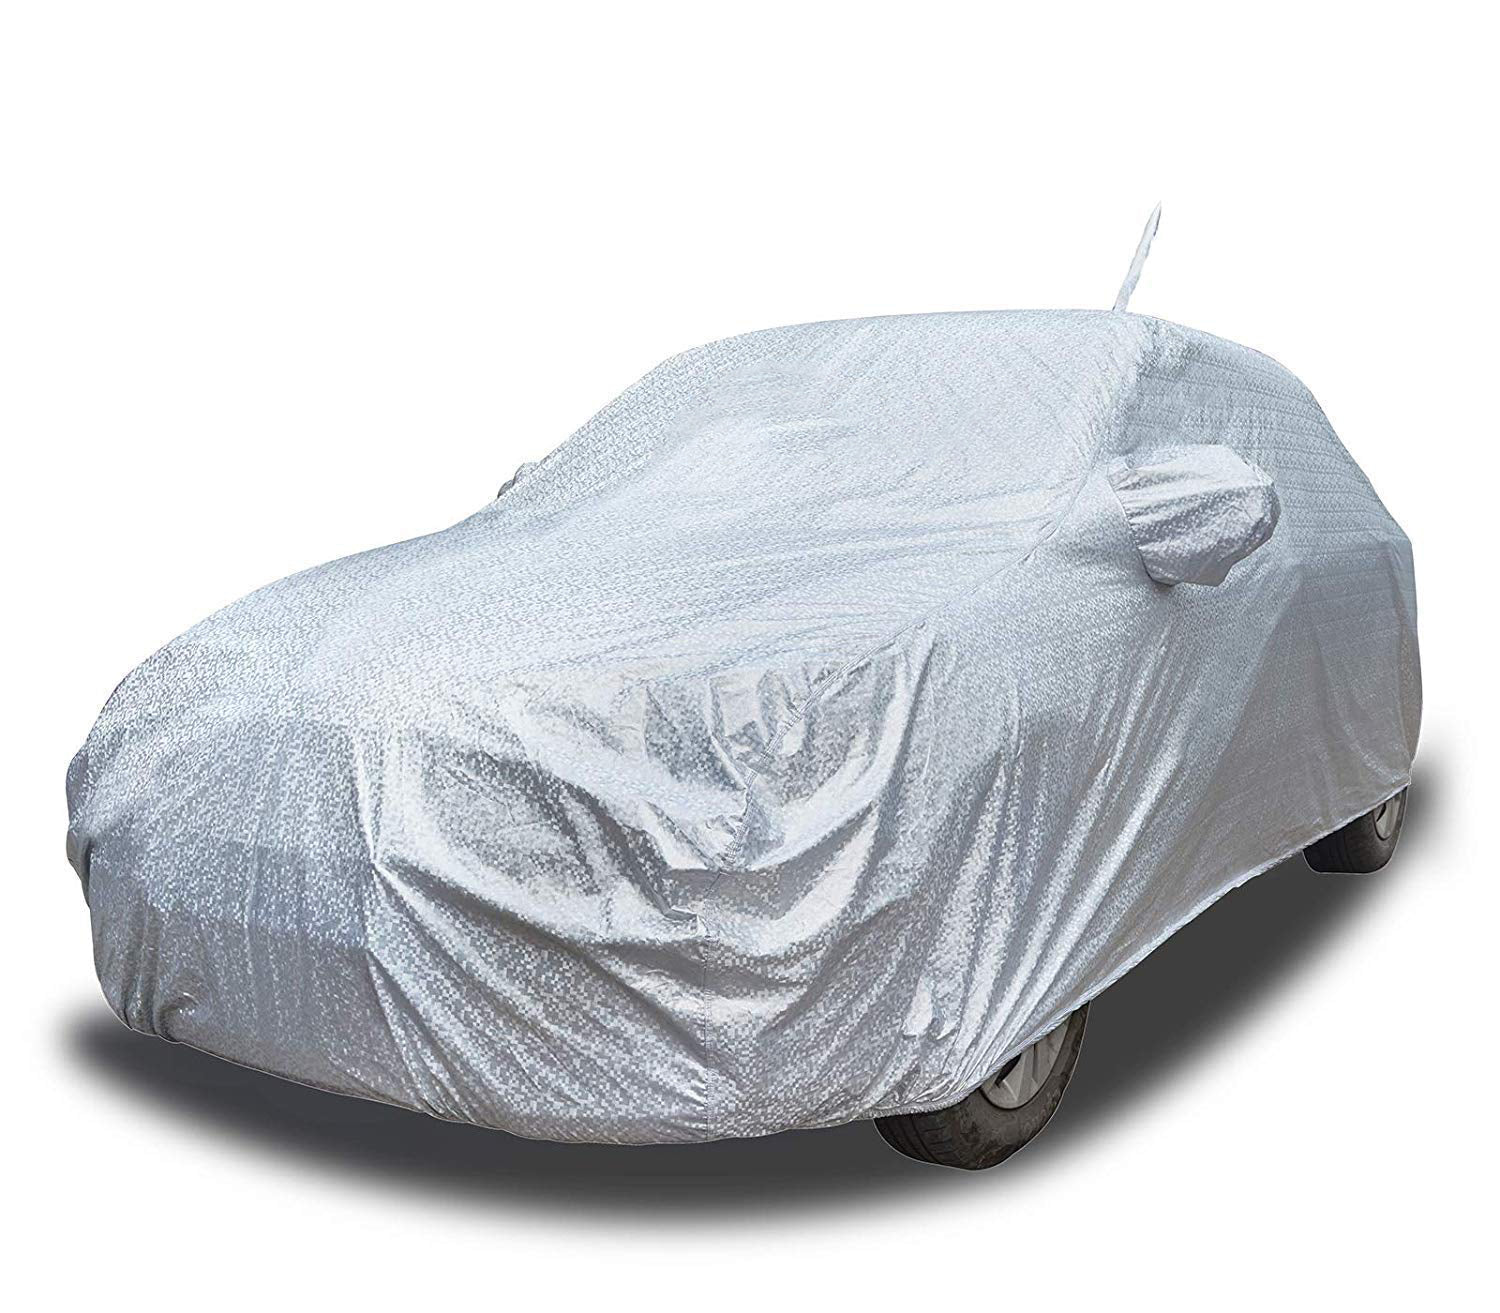 A Galaxy Product 100% Waterproof Car Cover For Fiat Punto (With Mirror  Pockets) (Silver, For 2004, 2005, 2006, 2007, 2008, 2009, 2010, 2011, 2012,  2013, 2014, 2015, 2016, 2017, 2018, 2019, 2020, 2021, 2022 Models)